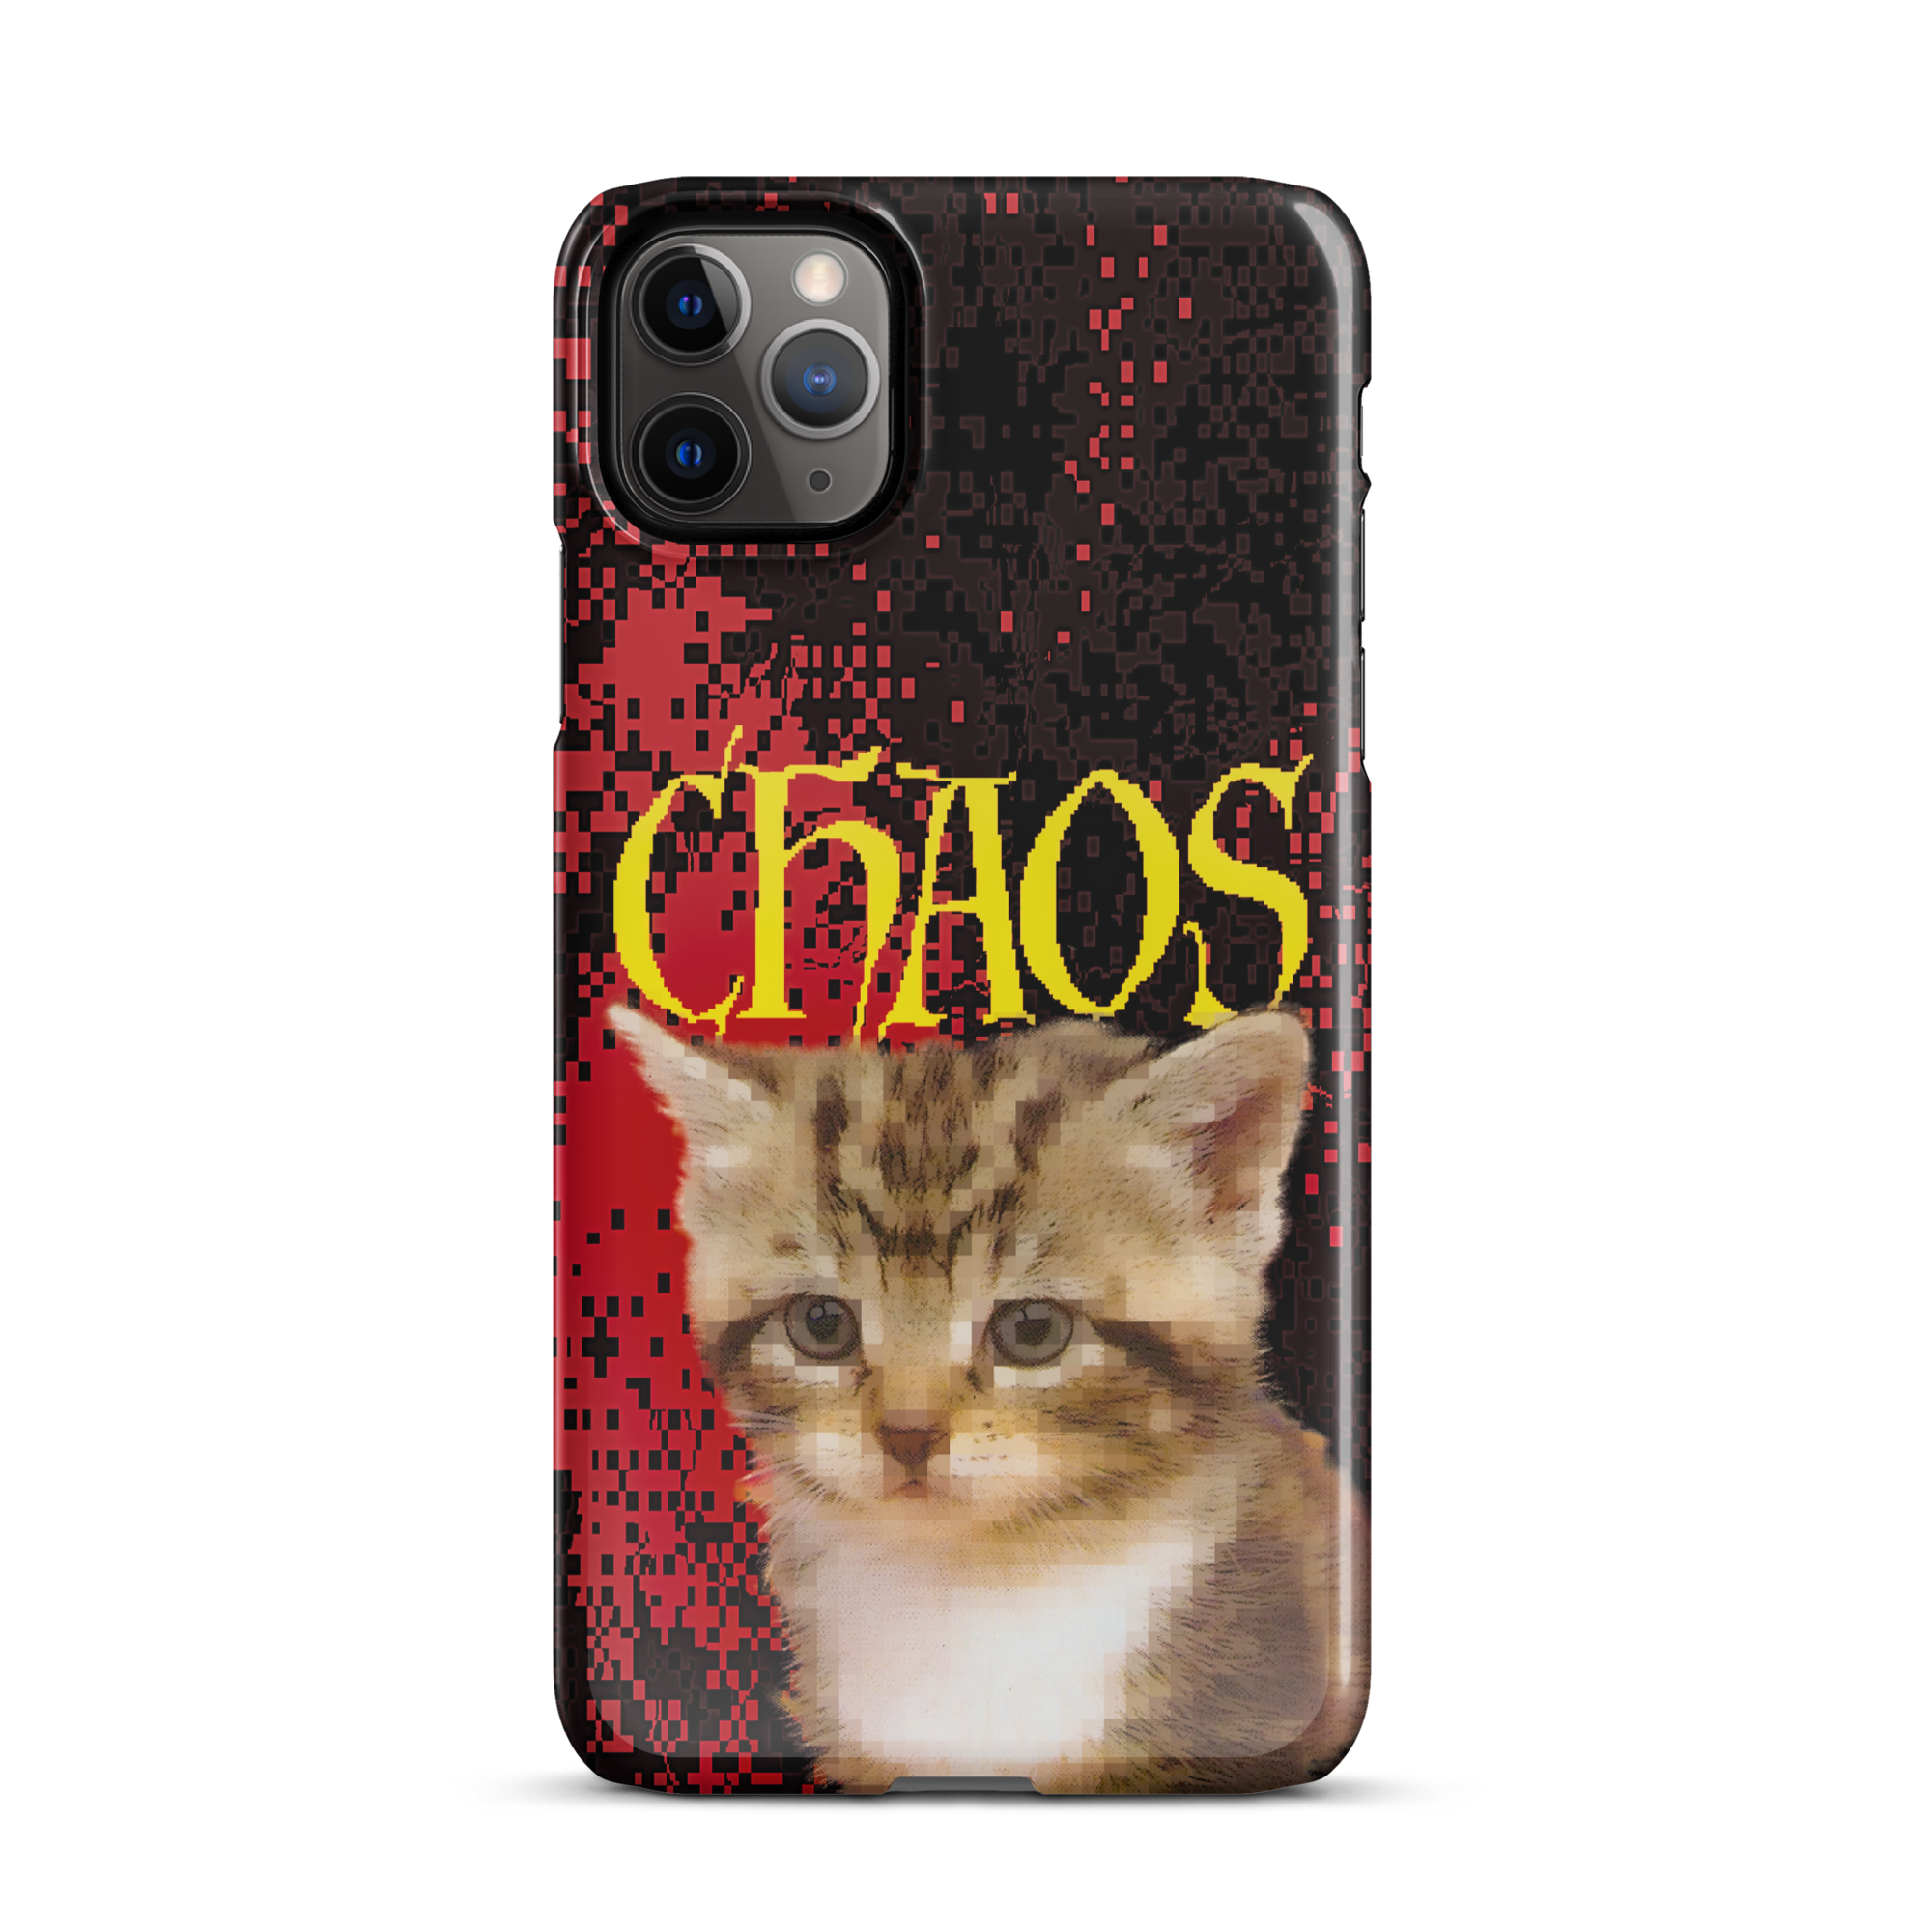 iphone snap case - cha0s